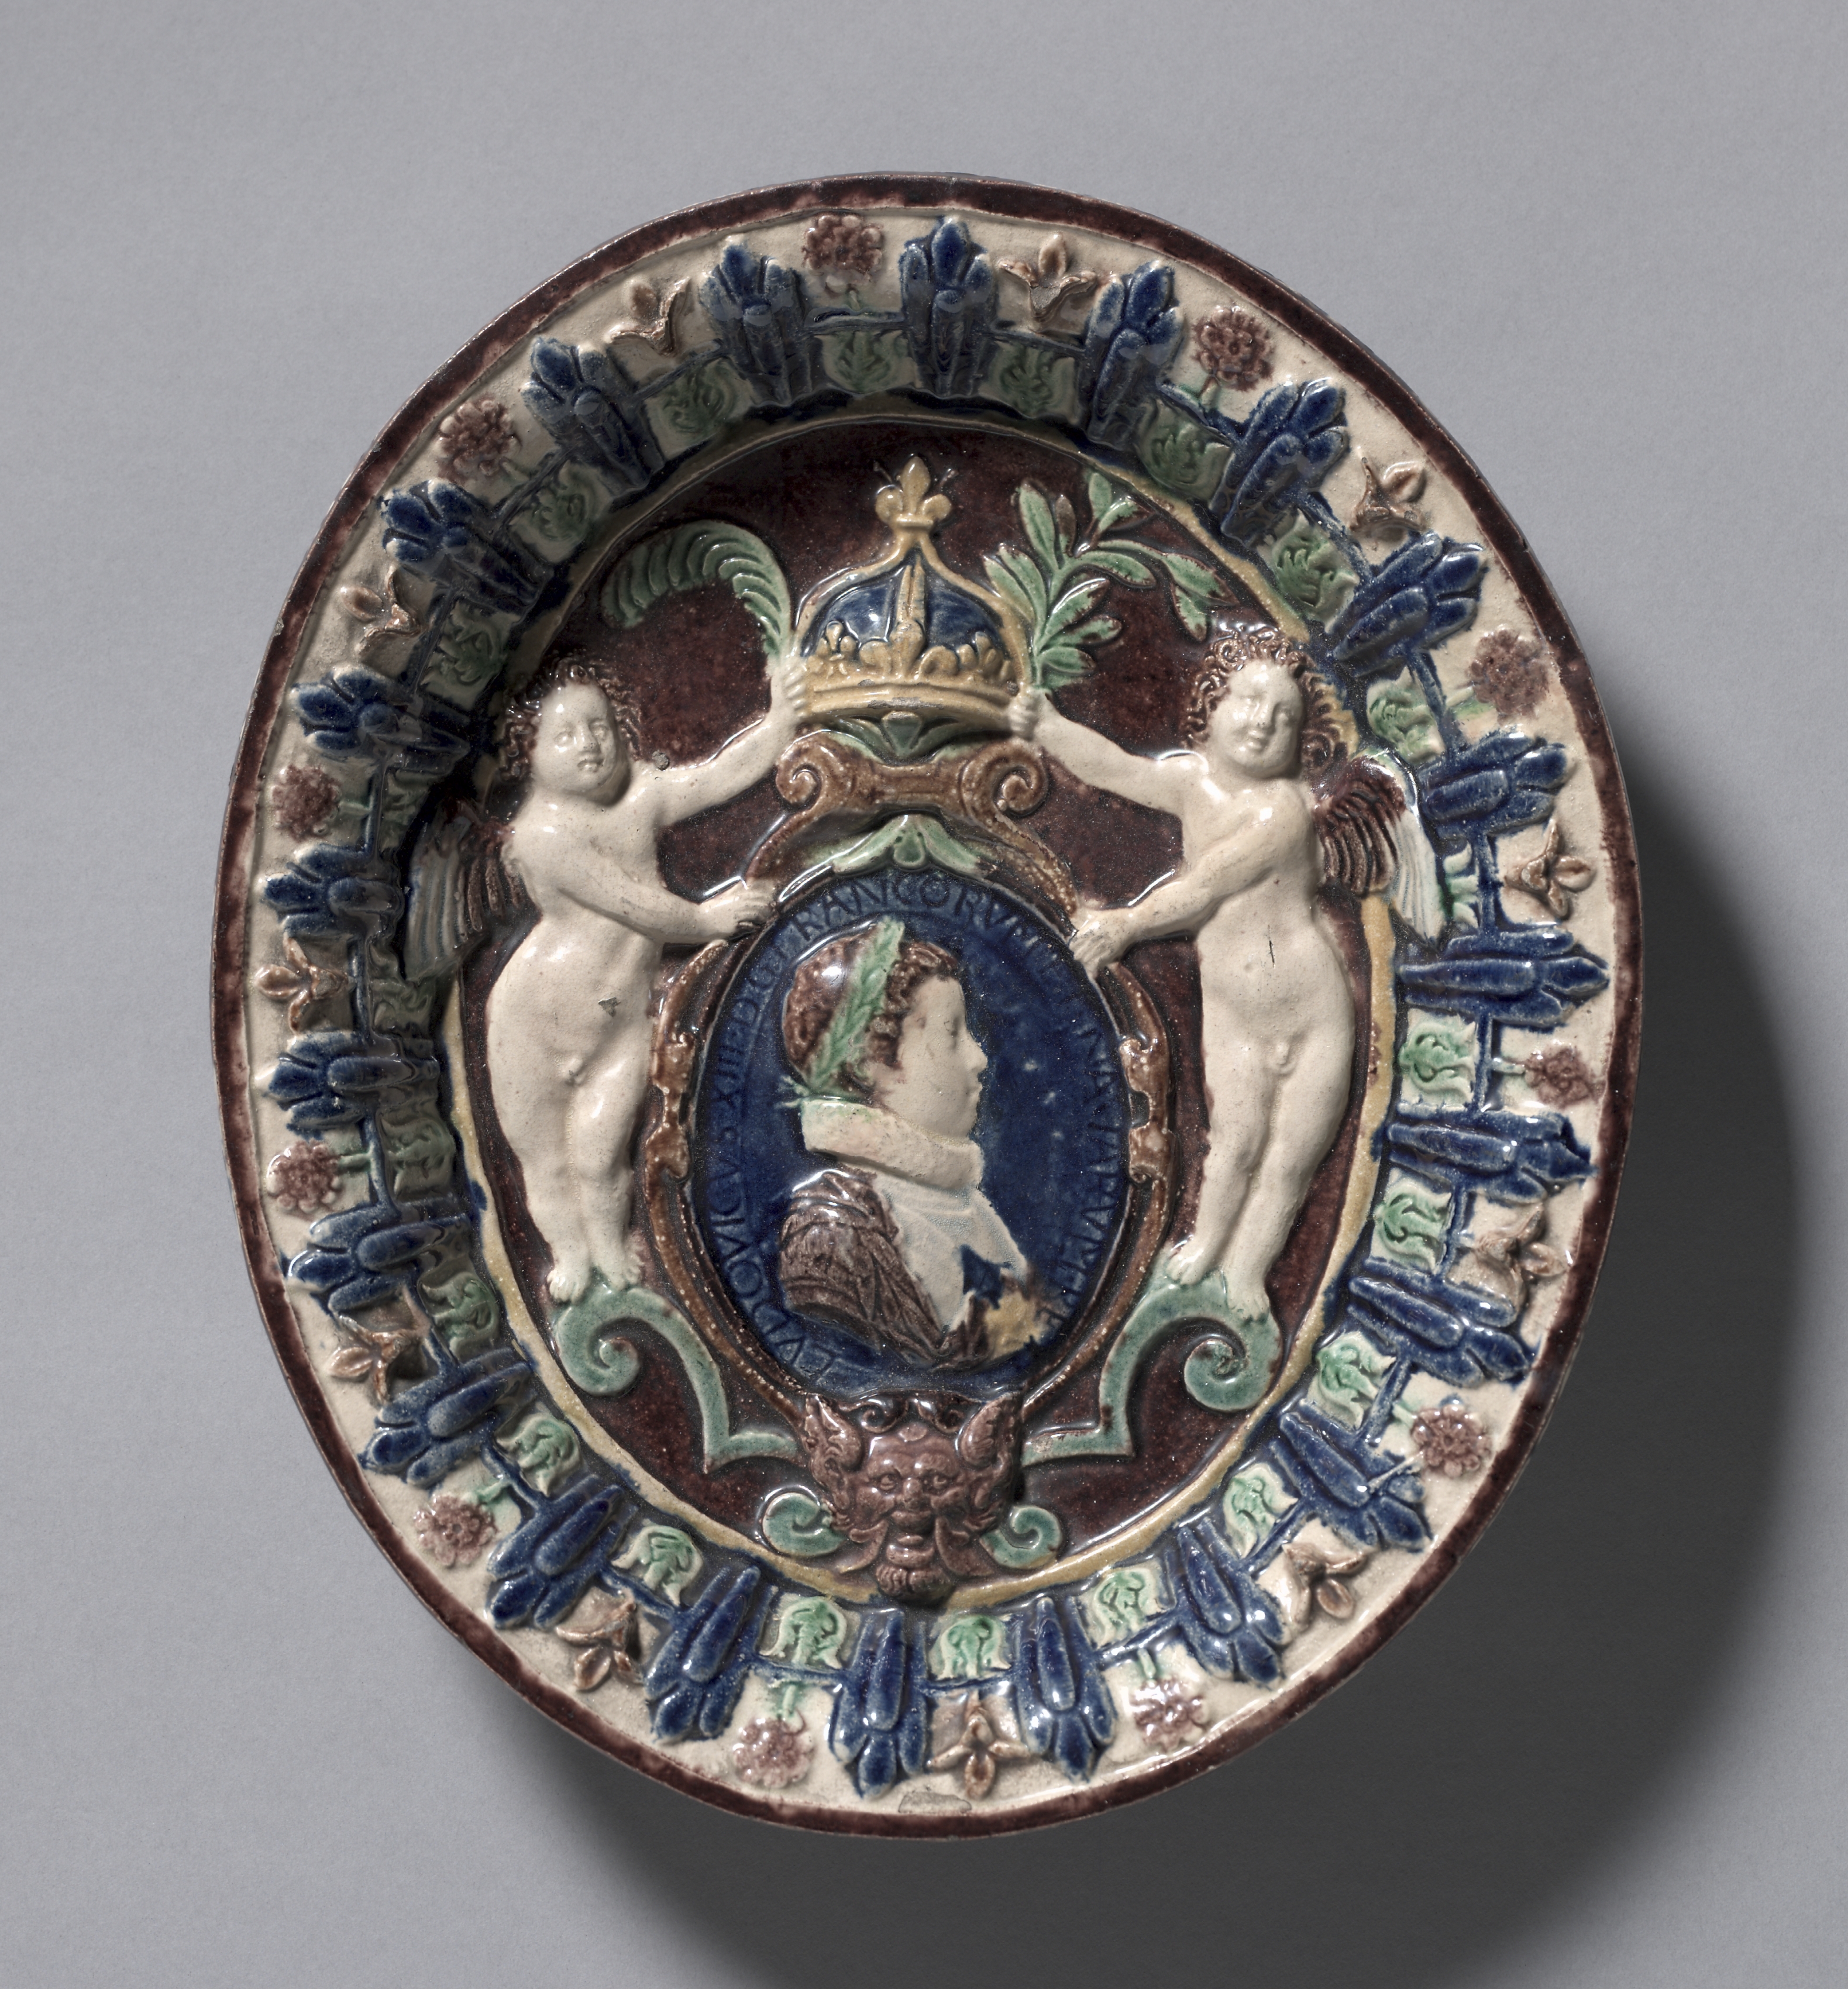 Oval Dish Commemorating the Ascent of the Young Louis XIII to the Throne of France